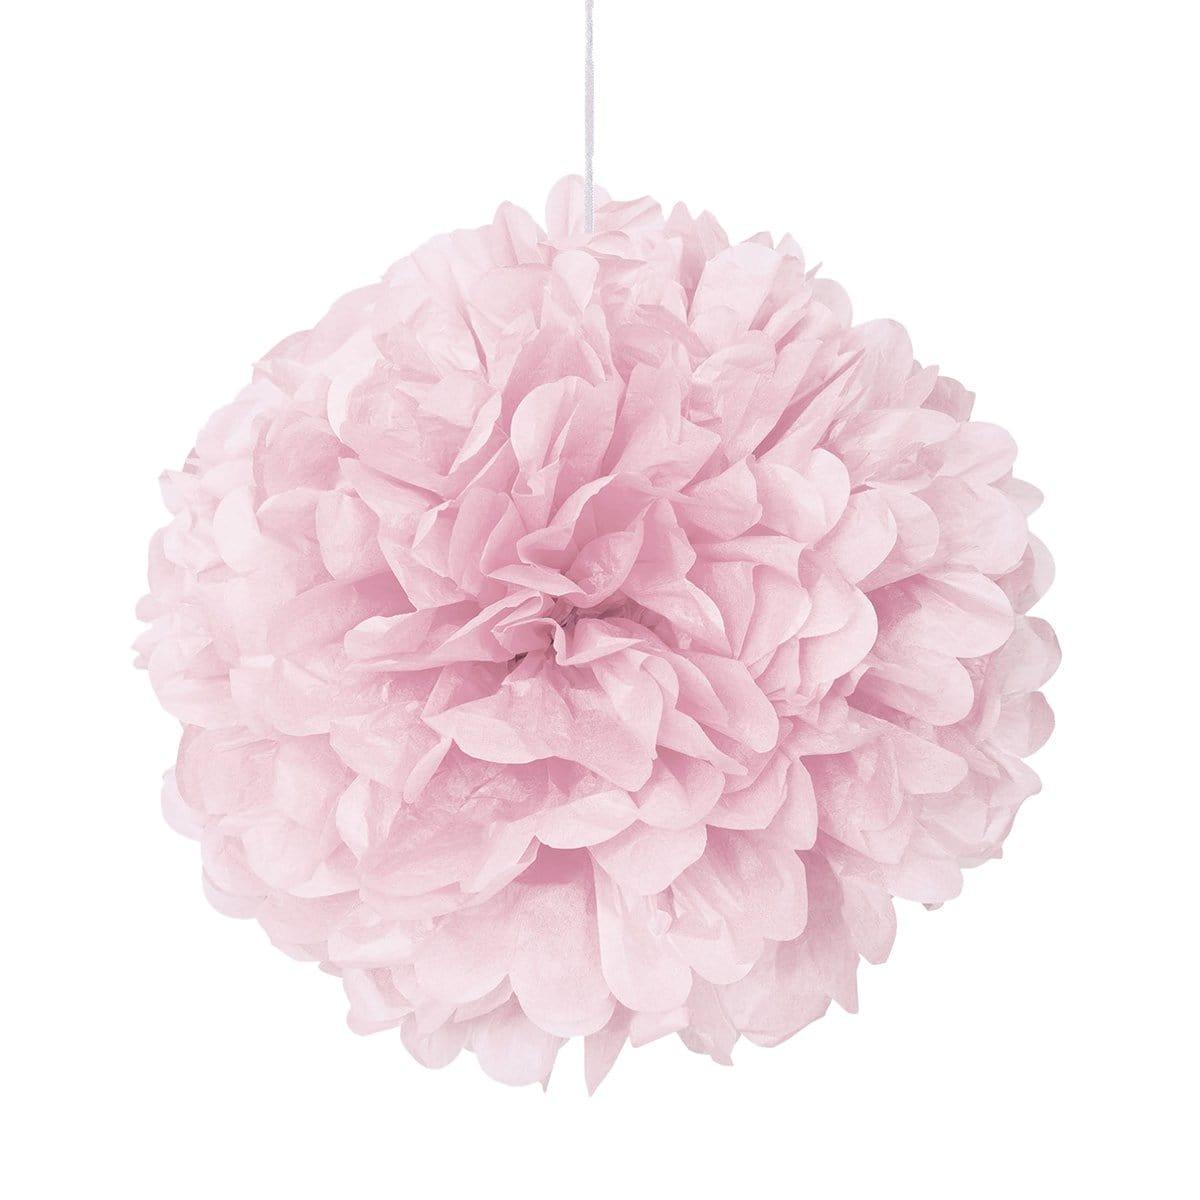 Buy Decorations Puff Decor - Pink 16 in. sold at Party Expert